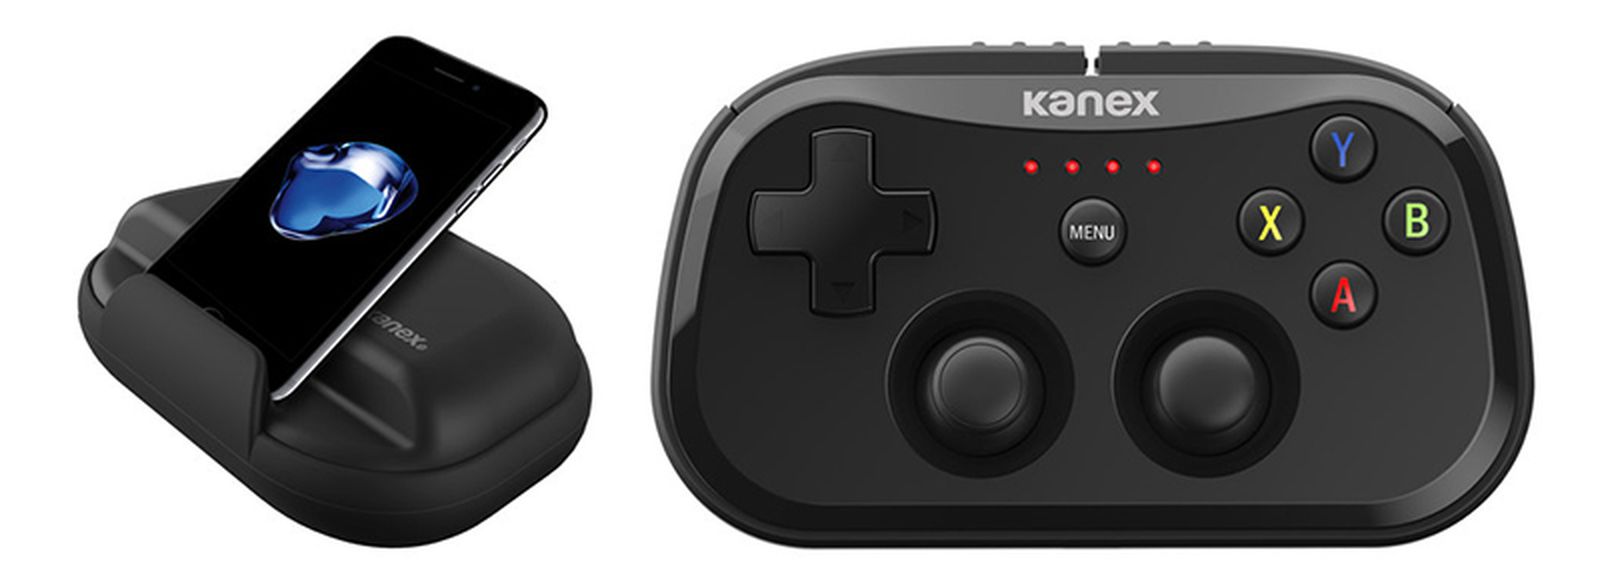 Kanex S Goplay Sidekick Pocket Sized Game Controller For Iphone Ipad And Apple Tv Now Available Macrumors